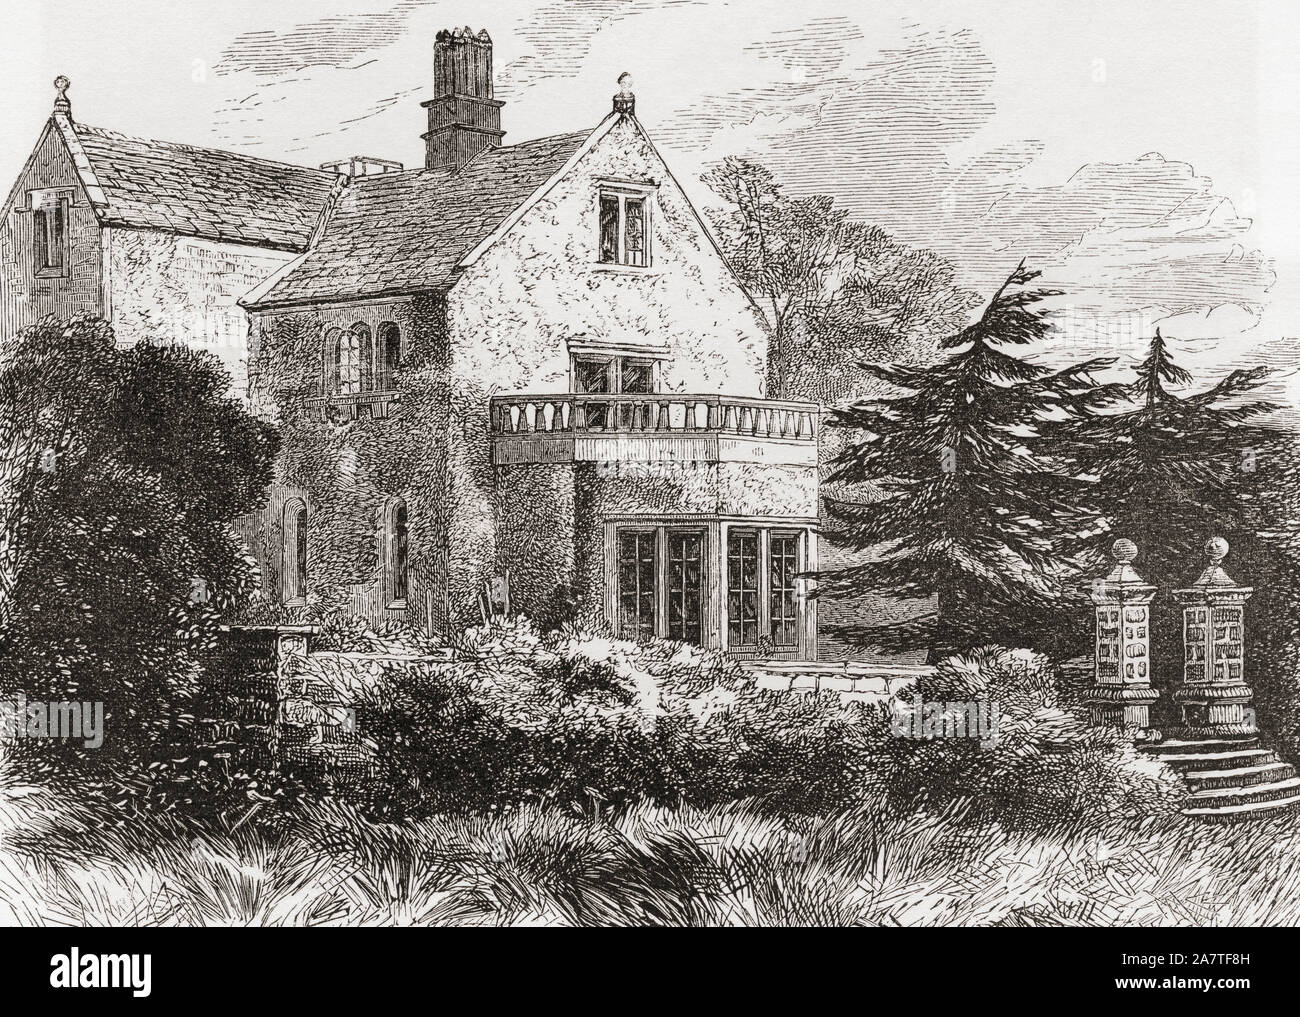 The home of Florence Nightingale,  Lea Hurst, Derbyshire, England, seen here in the 19th century.  From English Pictures, published 1890. Stock Photo